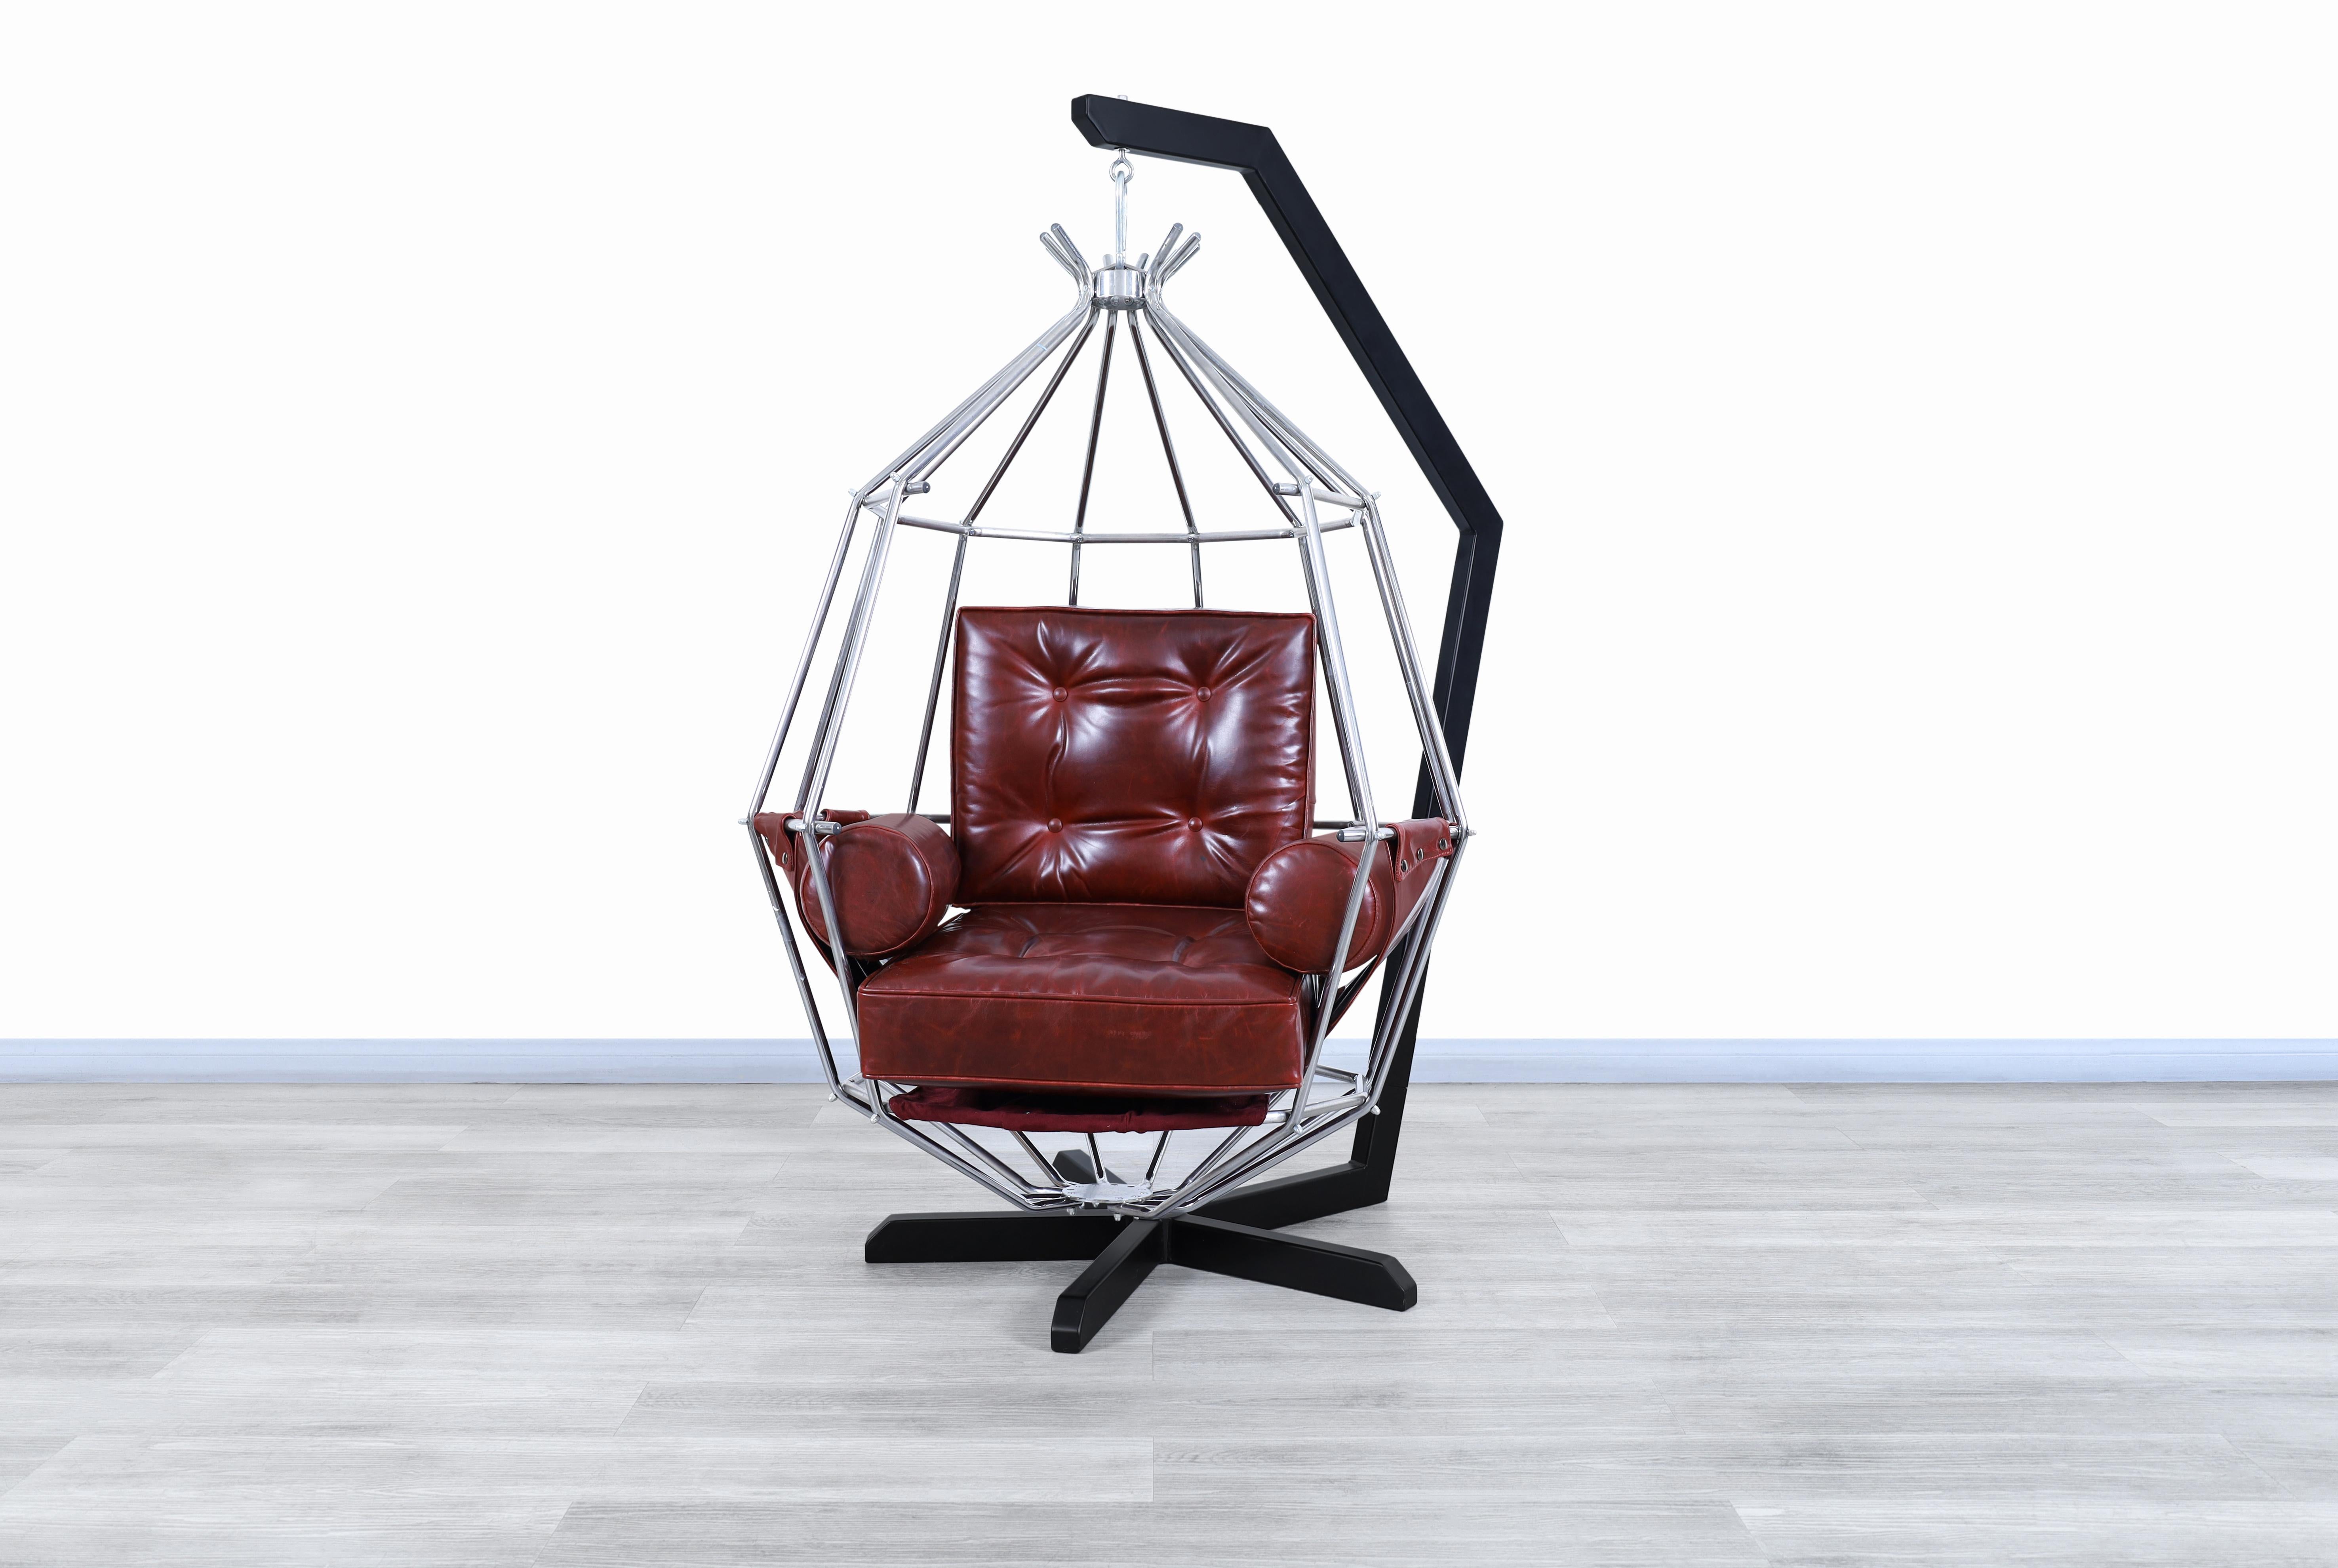 Stunning vintage leather “Perrot Cage” swing chair designed by Ib Arberg in Sweden, circa 1970s. This chair has an extravagant design that mixes different materials in a significant way, resulting in an elegant and captivating piece of furniture at